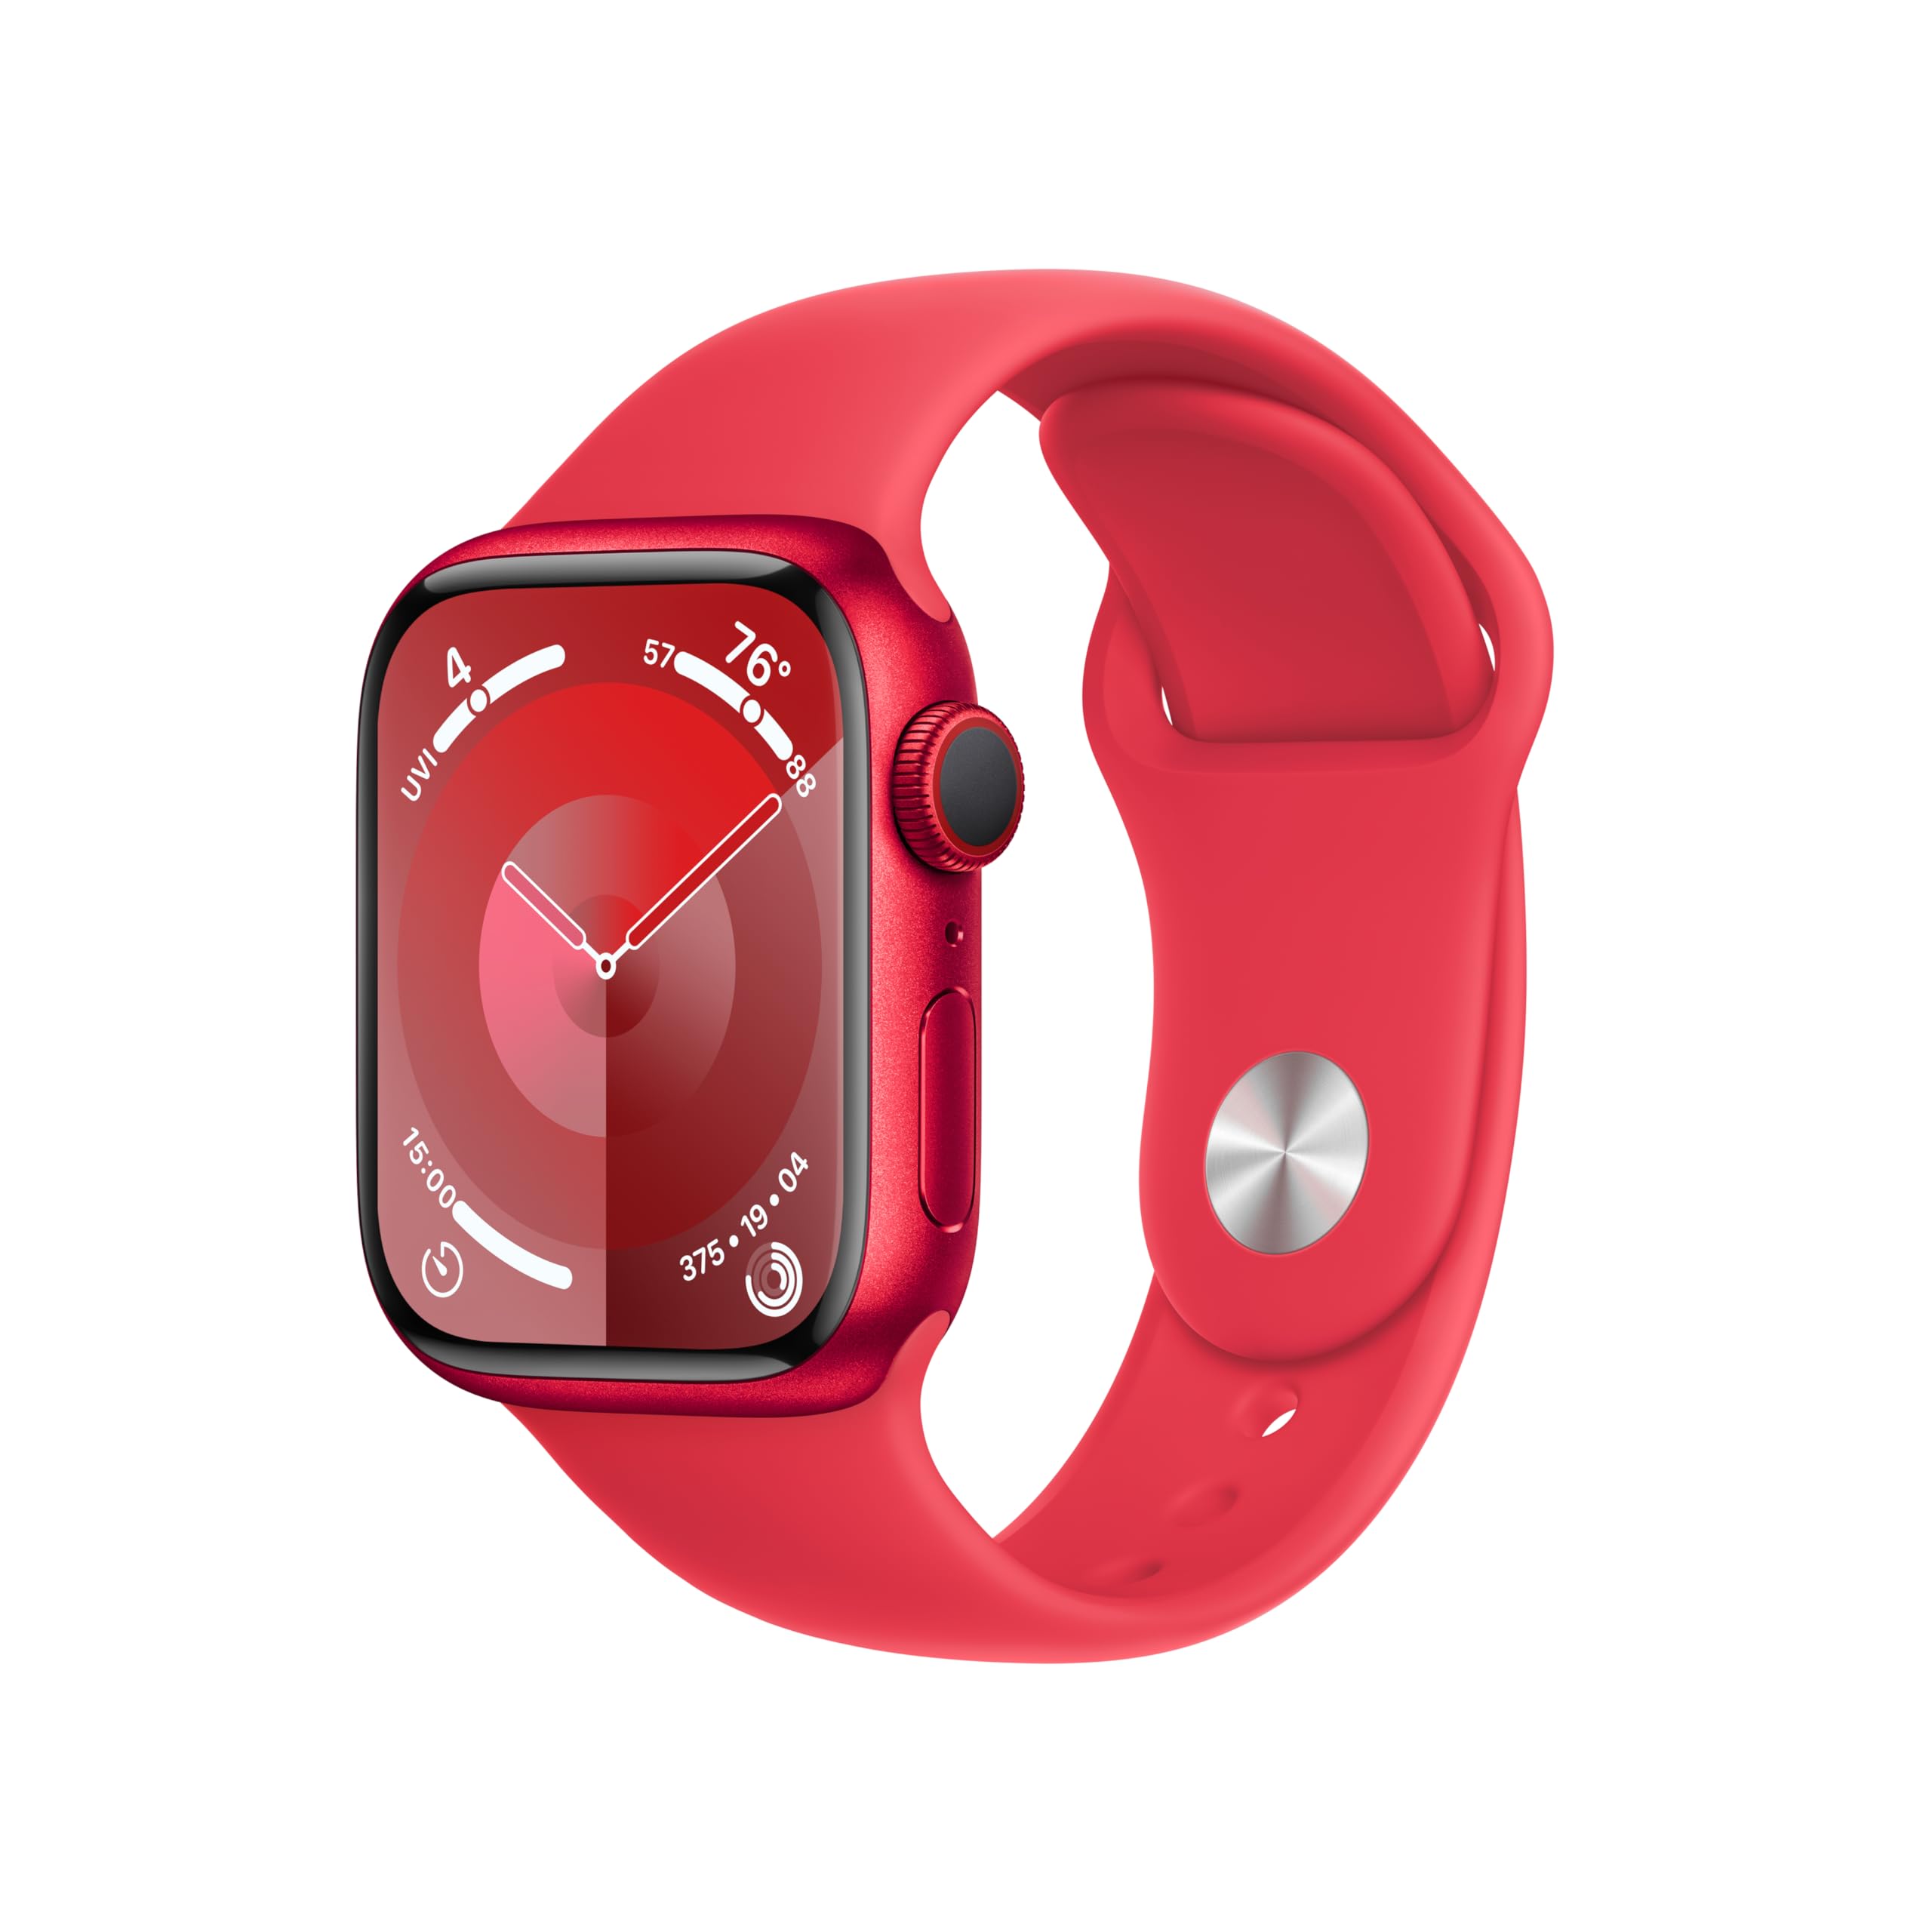 41mm Apple Watch Series 9 GPS & Cellular Aluminum Case Smartwatch w/ Sport Band (Red) $339.10 + Free Shipping